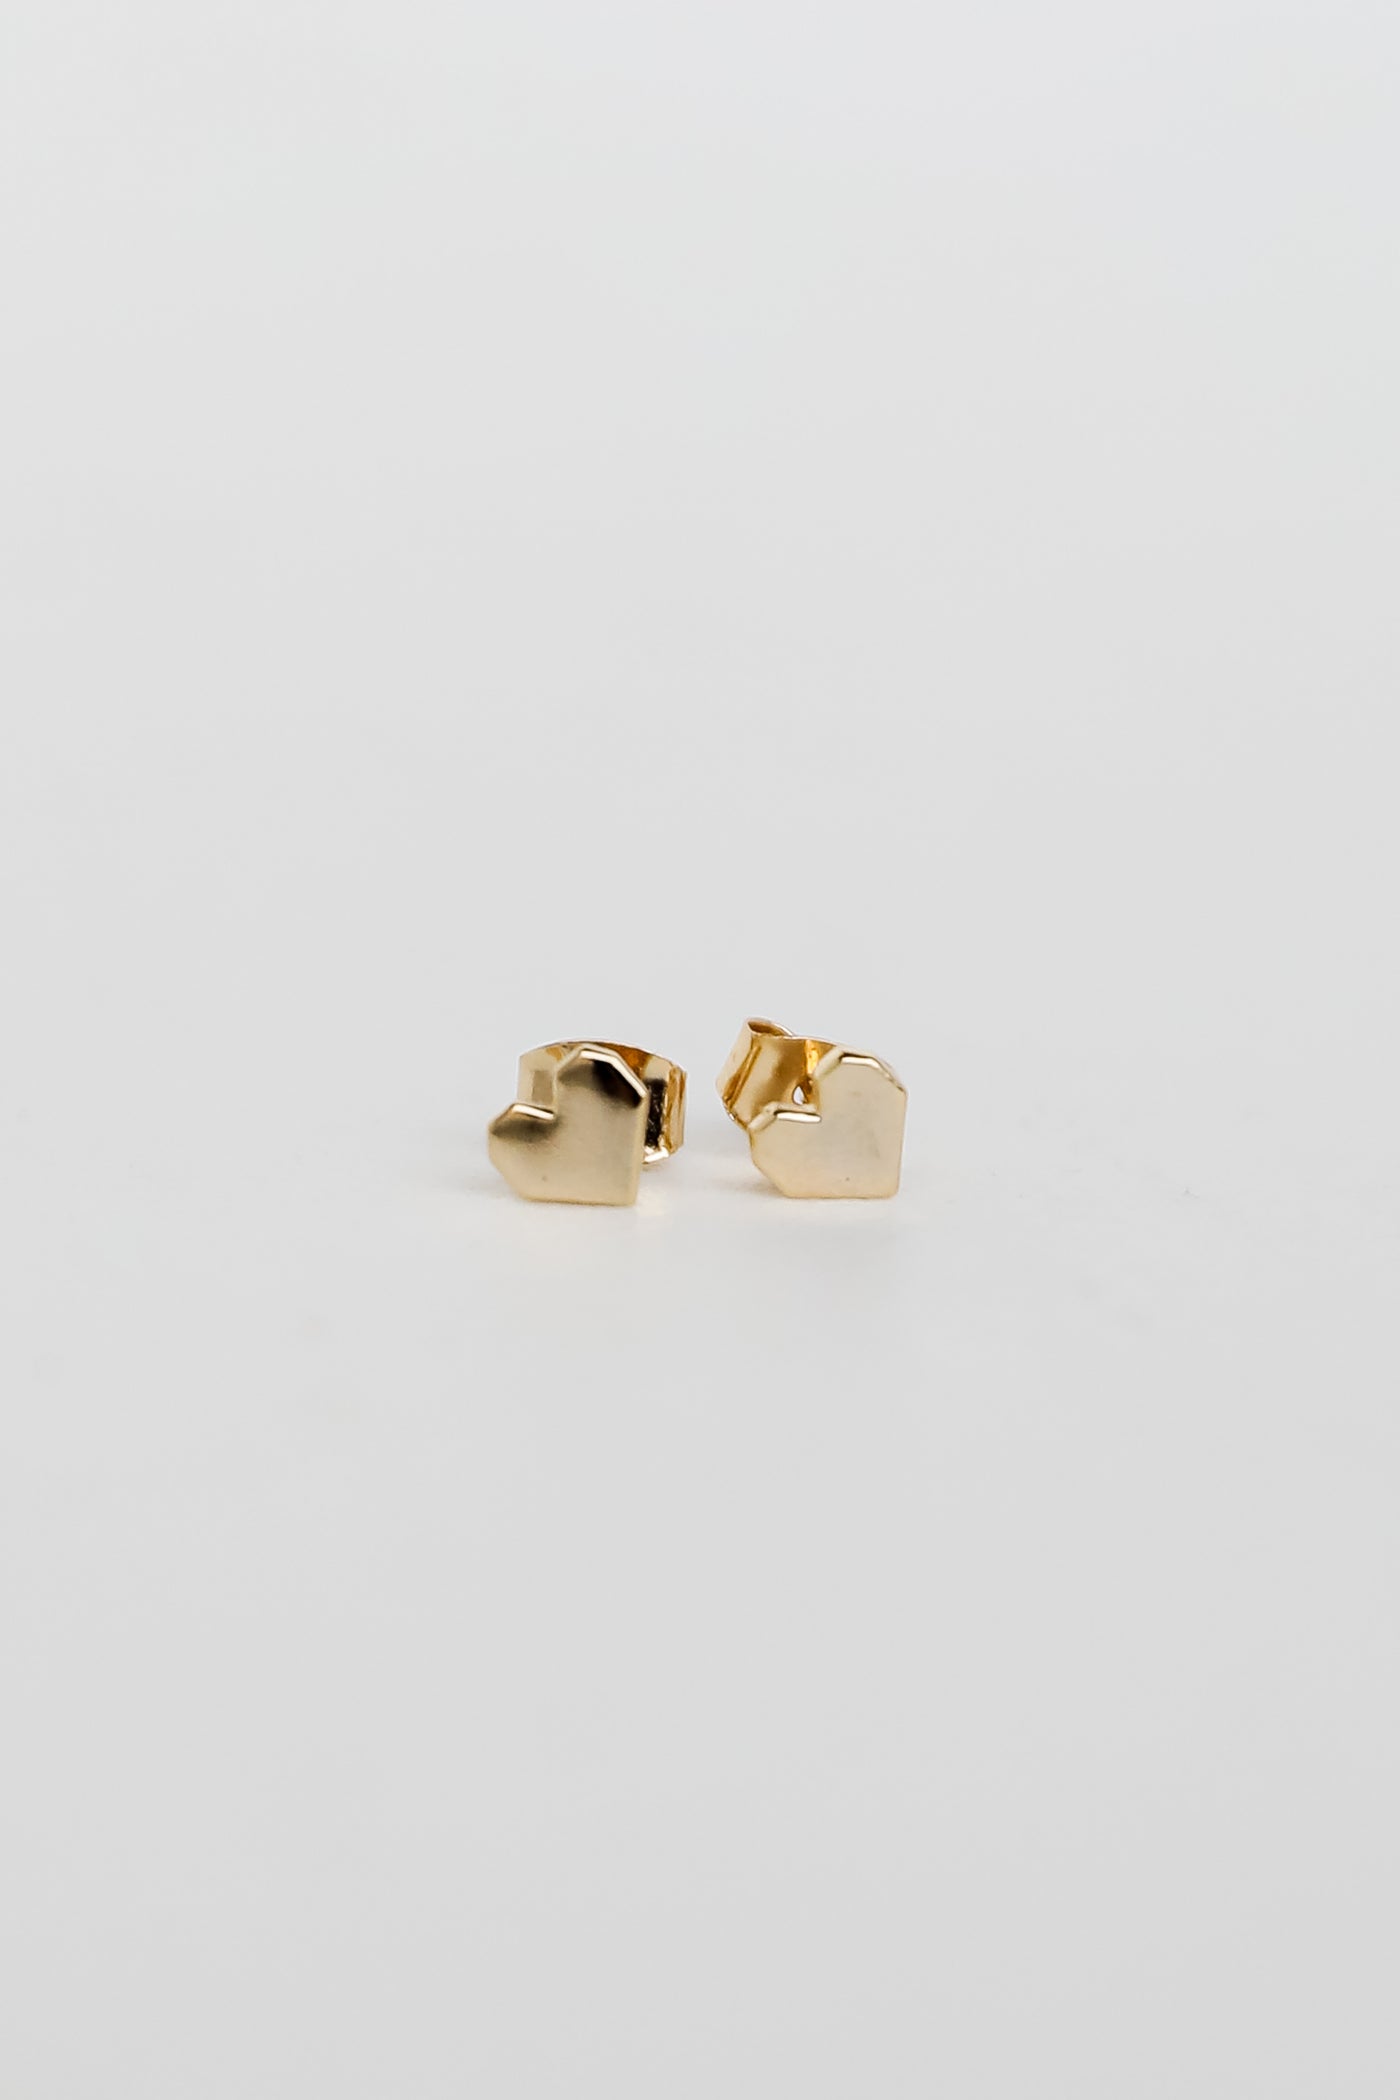 Gold Heart Stud Earrings close up